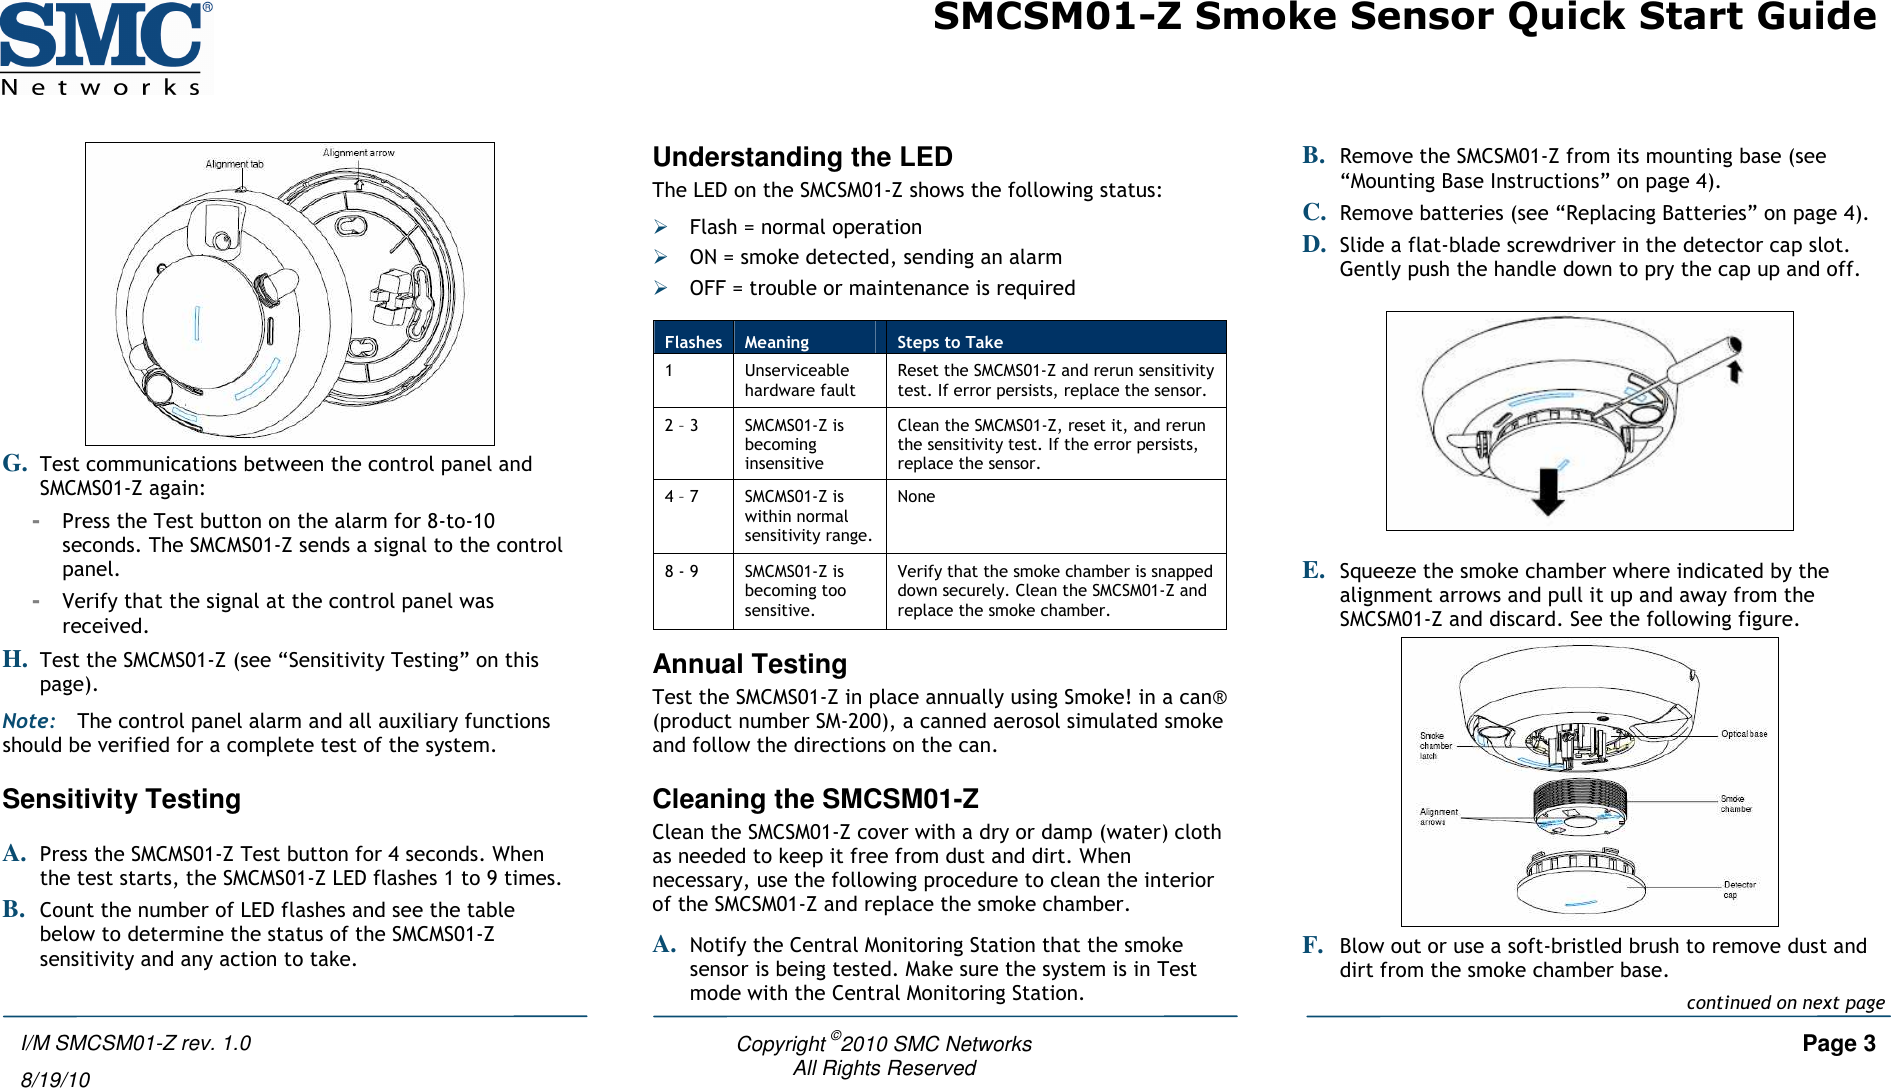 SMCSM01-Z Smoke Sensor Quick Start Guide   Copyright ©2010 SMC Networks     Page 3 All Rights Reserved  I/M SMCSM01-Z rev. 1.0 8/19/10  G. Test communications between the control panel and SMCMS01-Z again: - Press the Test button on the alarm for 8-to-10 seconds. The SMCMS01-Z sends a signal to the control panel. - Verify that the signal at the control panel was received. H. Test the SMCMS01-Z (see “Sensitivity Testing” on this page). Note: The control panel alarm and all auxiliary functions should be verified for a complete test of the system. Sensitivity Testing A. Press the SMCMS01-Z Test button for 4 seconds. When the test starts, the SMCMS01-Z LED flashes 1 to 9 times. B. Count the number of LED flashes and see the table below to determine the status of the SMCMS01-Z sensitivity and any action to take.  Understanding the LED The LED on the SMCSM01-Z shows the following status:  Flash = normal operation  ON = smoke detected, sending an alarm  OFF = trouble or maintenance is required Annual Testing Test the SMCMS01-Z in place annually using Smoke! in a can® (product number SM-200), a canned aerosol simulated smoke and follow the directions on the can. Cleaning the SMCSM01-Z Clean the SMCSM01-Z cover with a dry or damp (water) cloth as needed to keep it free from dust and dirt. When necessary, use the following procedure to clean the interior of the SMCSM01-Z and replace the smoke chamber. A. Notify the Central Monitoring Station that the smoke sensor is being tested. Make sure the system is in Test mode with the Central Monitoring Station. B. Remove the SMCSM01-Z from its mounting base (see “Mounting Base Instructions” on page 4). C. Remove batteries (see “Replacing Batteries” on page 4). D. Slide a flat-blade screwdriver in the detector cap slot. Gently push the handle down to pry the cap up and off.    E. Squeeze the smoke chamber where indicated by the alignment arrows and pull it up and away from the SMCSM01-Z and discard. See the following figure.  F. Blow out or use a soft-bristled brush to remove dust and dirt from the smoke chamber base. Flashes  Meaning  Steps to Take 1  Unserviceable hardware fault Reset the SMCMS01-Z and rerun sensitivity test. If error persists, replace the sensor. 2 – 3  SMCMS01-Z is becoming insensitive Clean the SMCMS01-Z, reset it, and rerun the sensitivity test. If the error persists, replace the sensor. 4 – 7  SMCMS01-Z is within normal sensitivity range. None 8 - 9  SMCMS01-Z is becoming too sensitive. Verify that the smoke chamber is snapped down securely. Clean the SMCSM01-Z and replace the smoke chamber. continued on next page 